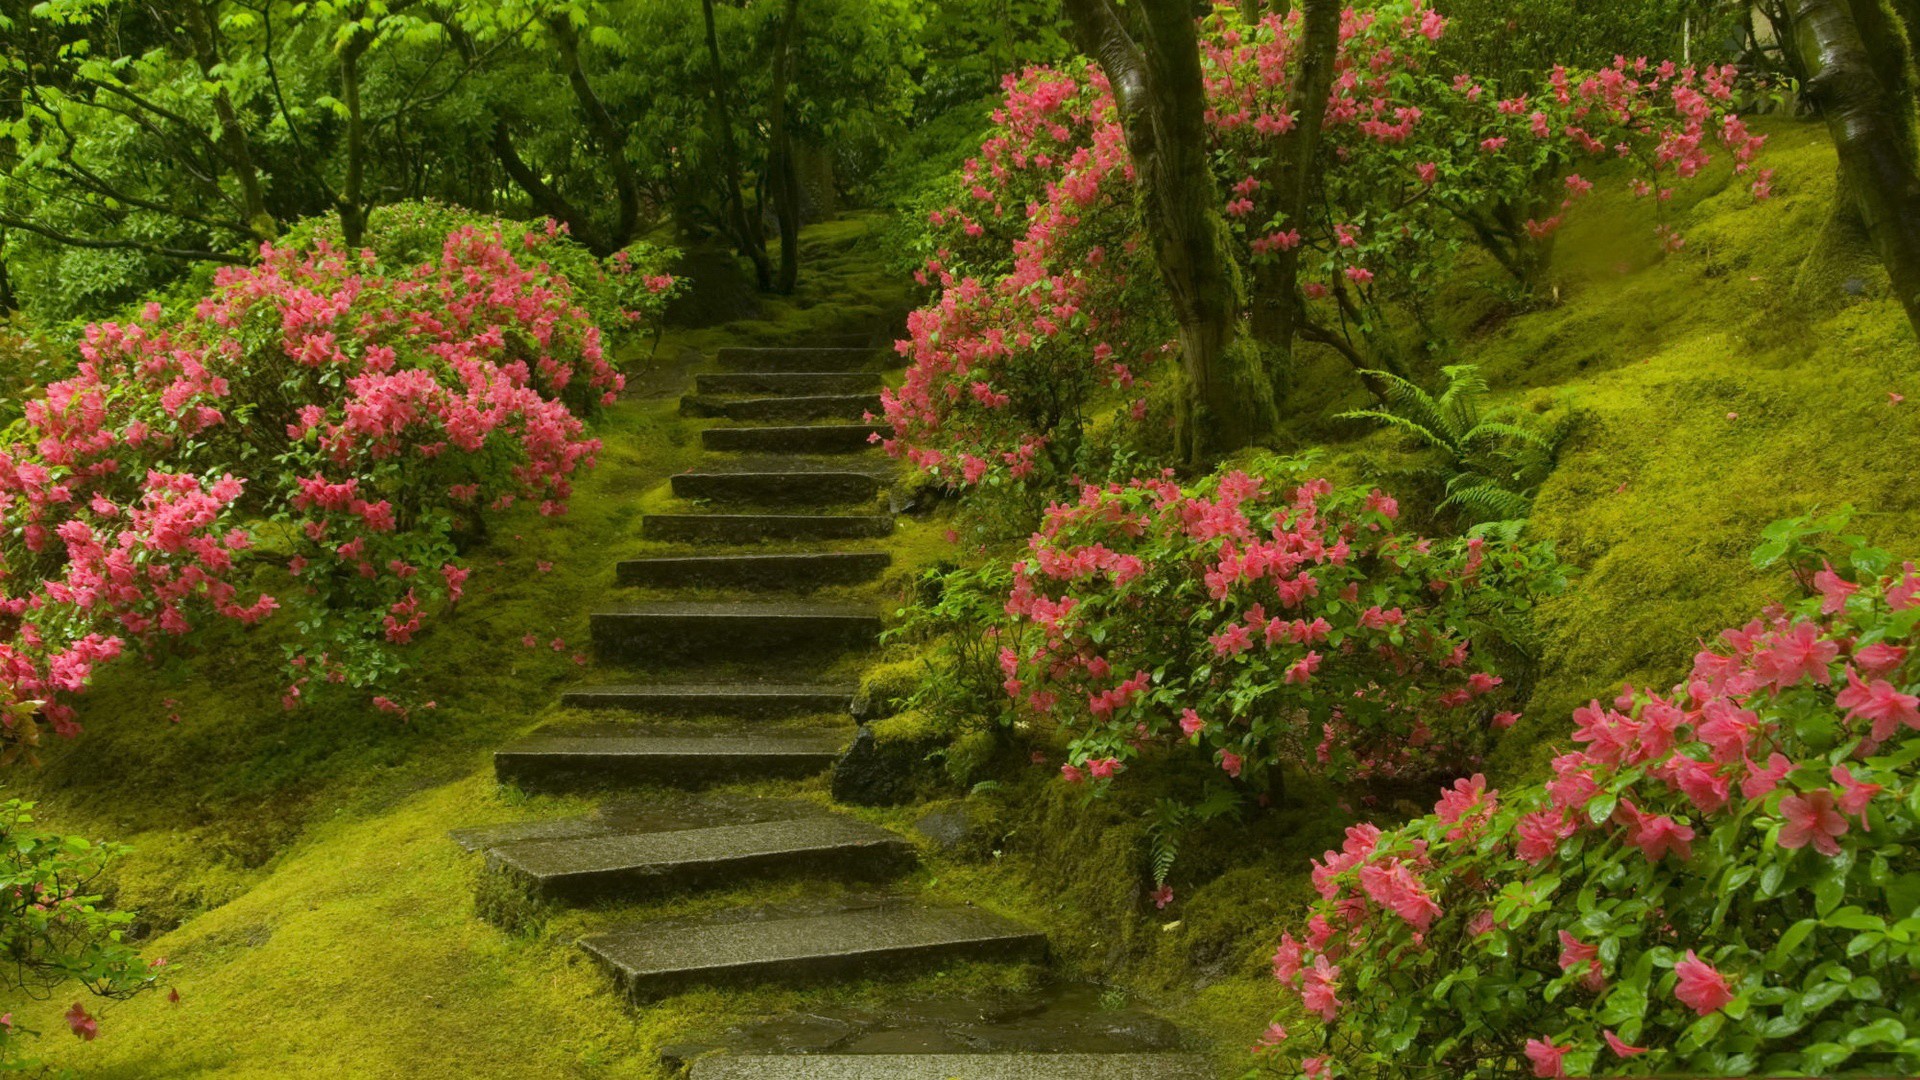 General 1920x1080 nature traditional art plants flowers trees stairs artwork